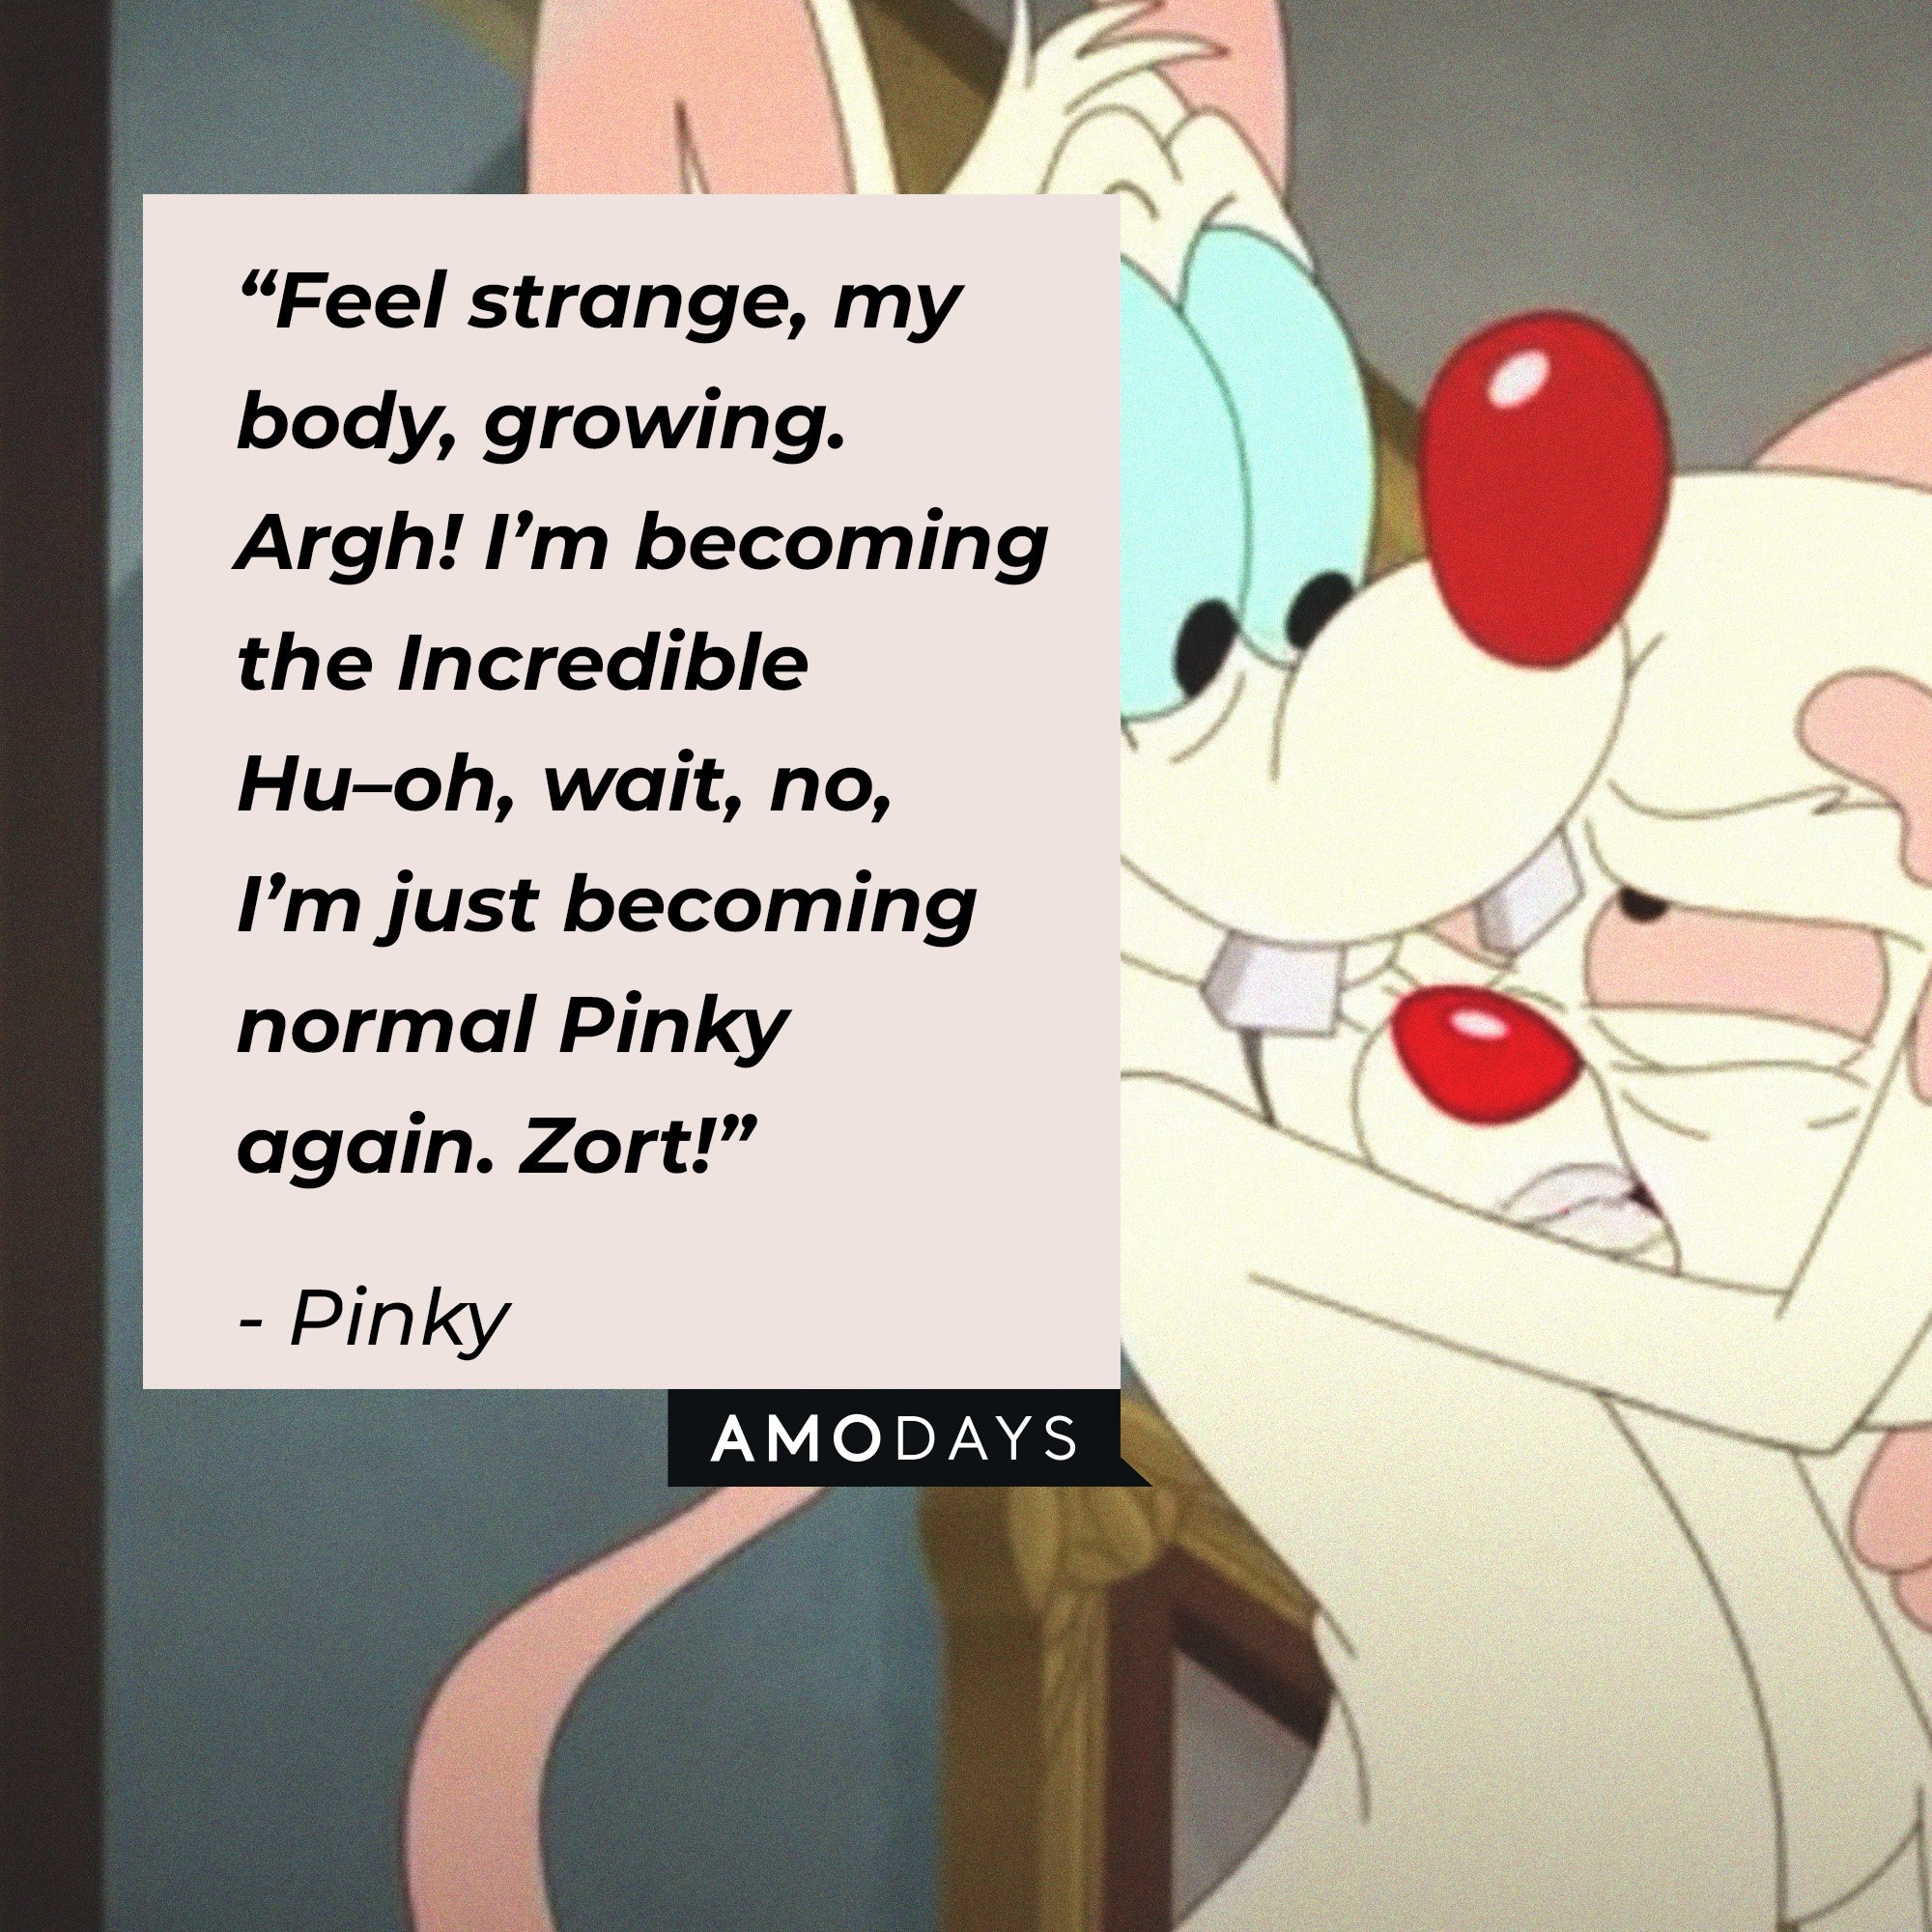 Pinky's quote: “Feel strange, my body, growing. Argh! I’m becoming the Incredible Hu–oh, wait, no, I’m just becoming normal Pinky again. Zort!” | Image: AmoDays